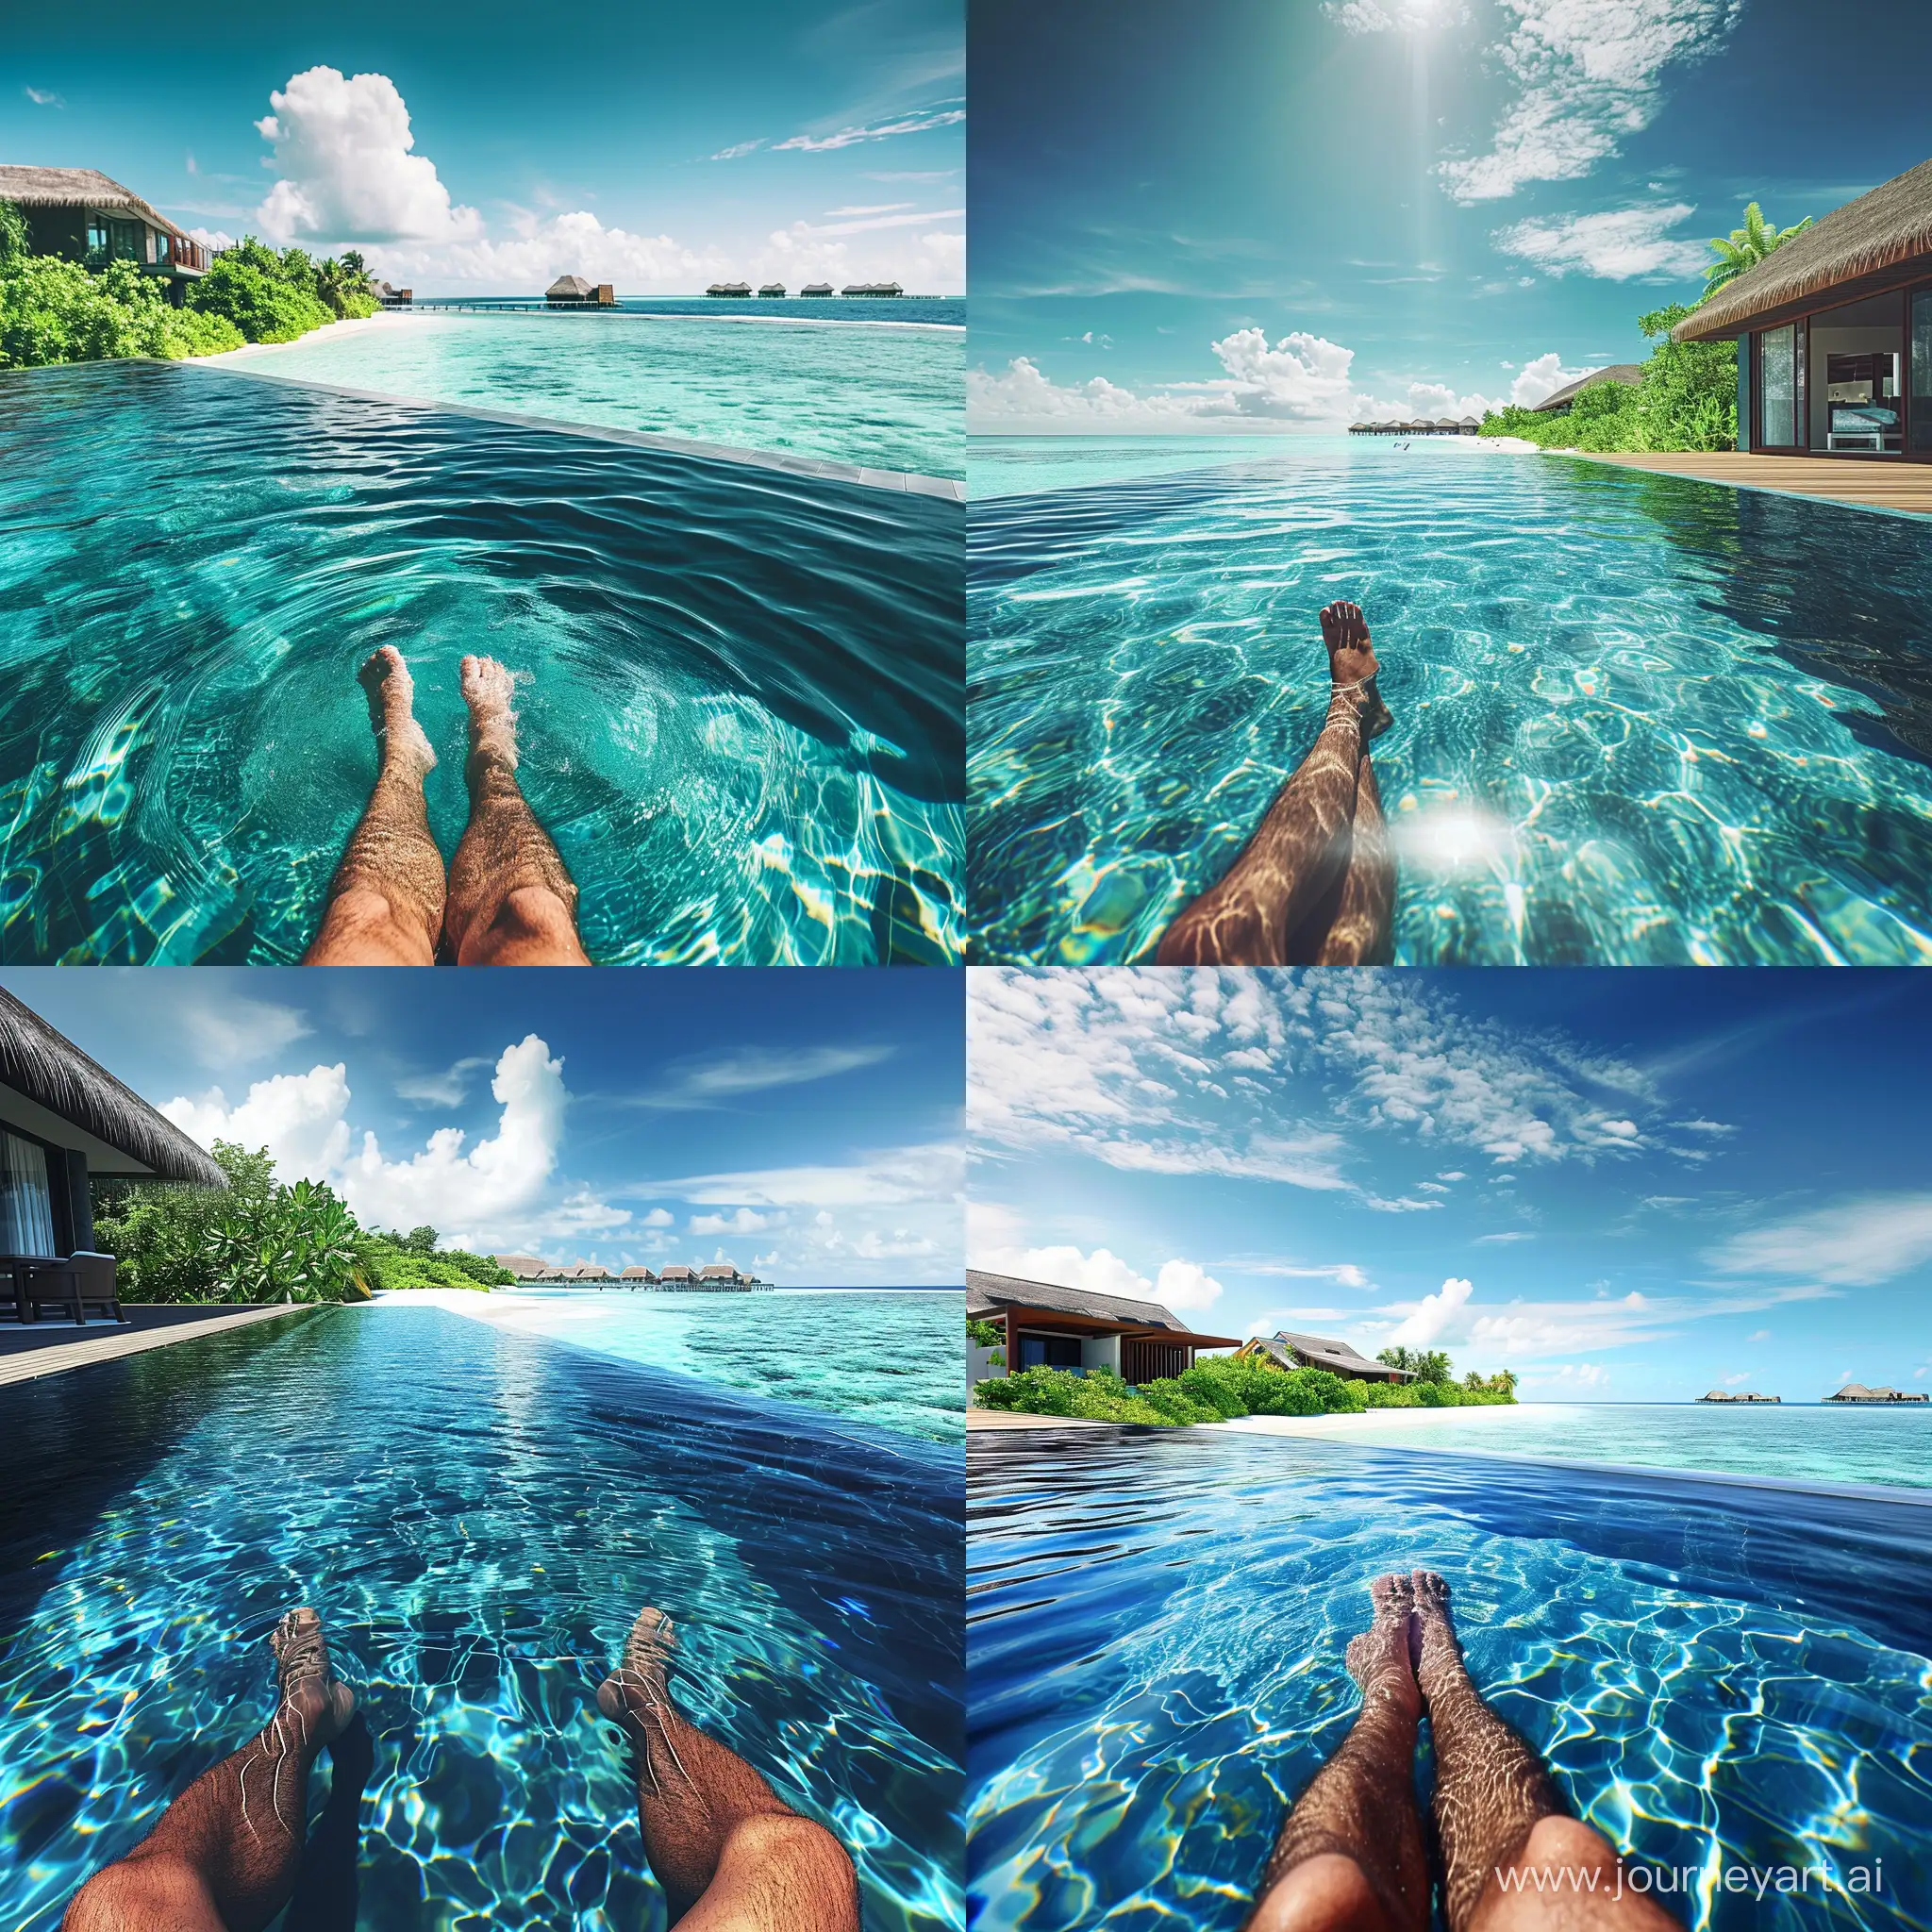 "Create an ultra-high-definition image depicting the point of view of a man sitting in an infinity pool at a luxurious resort in the Maldives. The scene should show crystal clear blue water seamlessly merging with the ocean in the background, under a bright, sunny sky. Include details like the man's legs partially submerged in the shimmering water, with a view of the wooden pool deck. The resort should feature modern, elegant architecture with lush tropical greenery. In the distance, there should be a view of white sandy beaches and overwater bungalows with thatched roofs. The overall atmosphere should be serene and idyllic, capturing the essence of a tranquil, luxurious holiday in the Maldives."